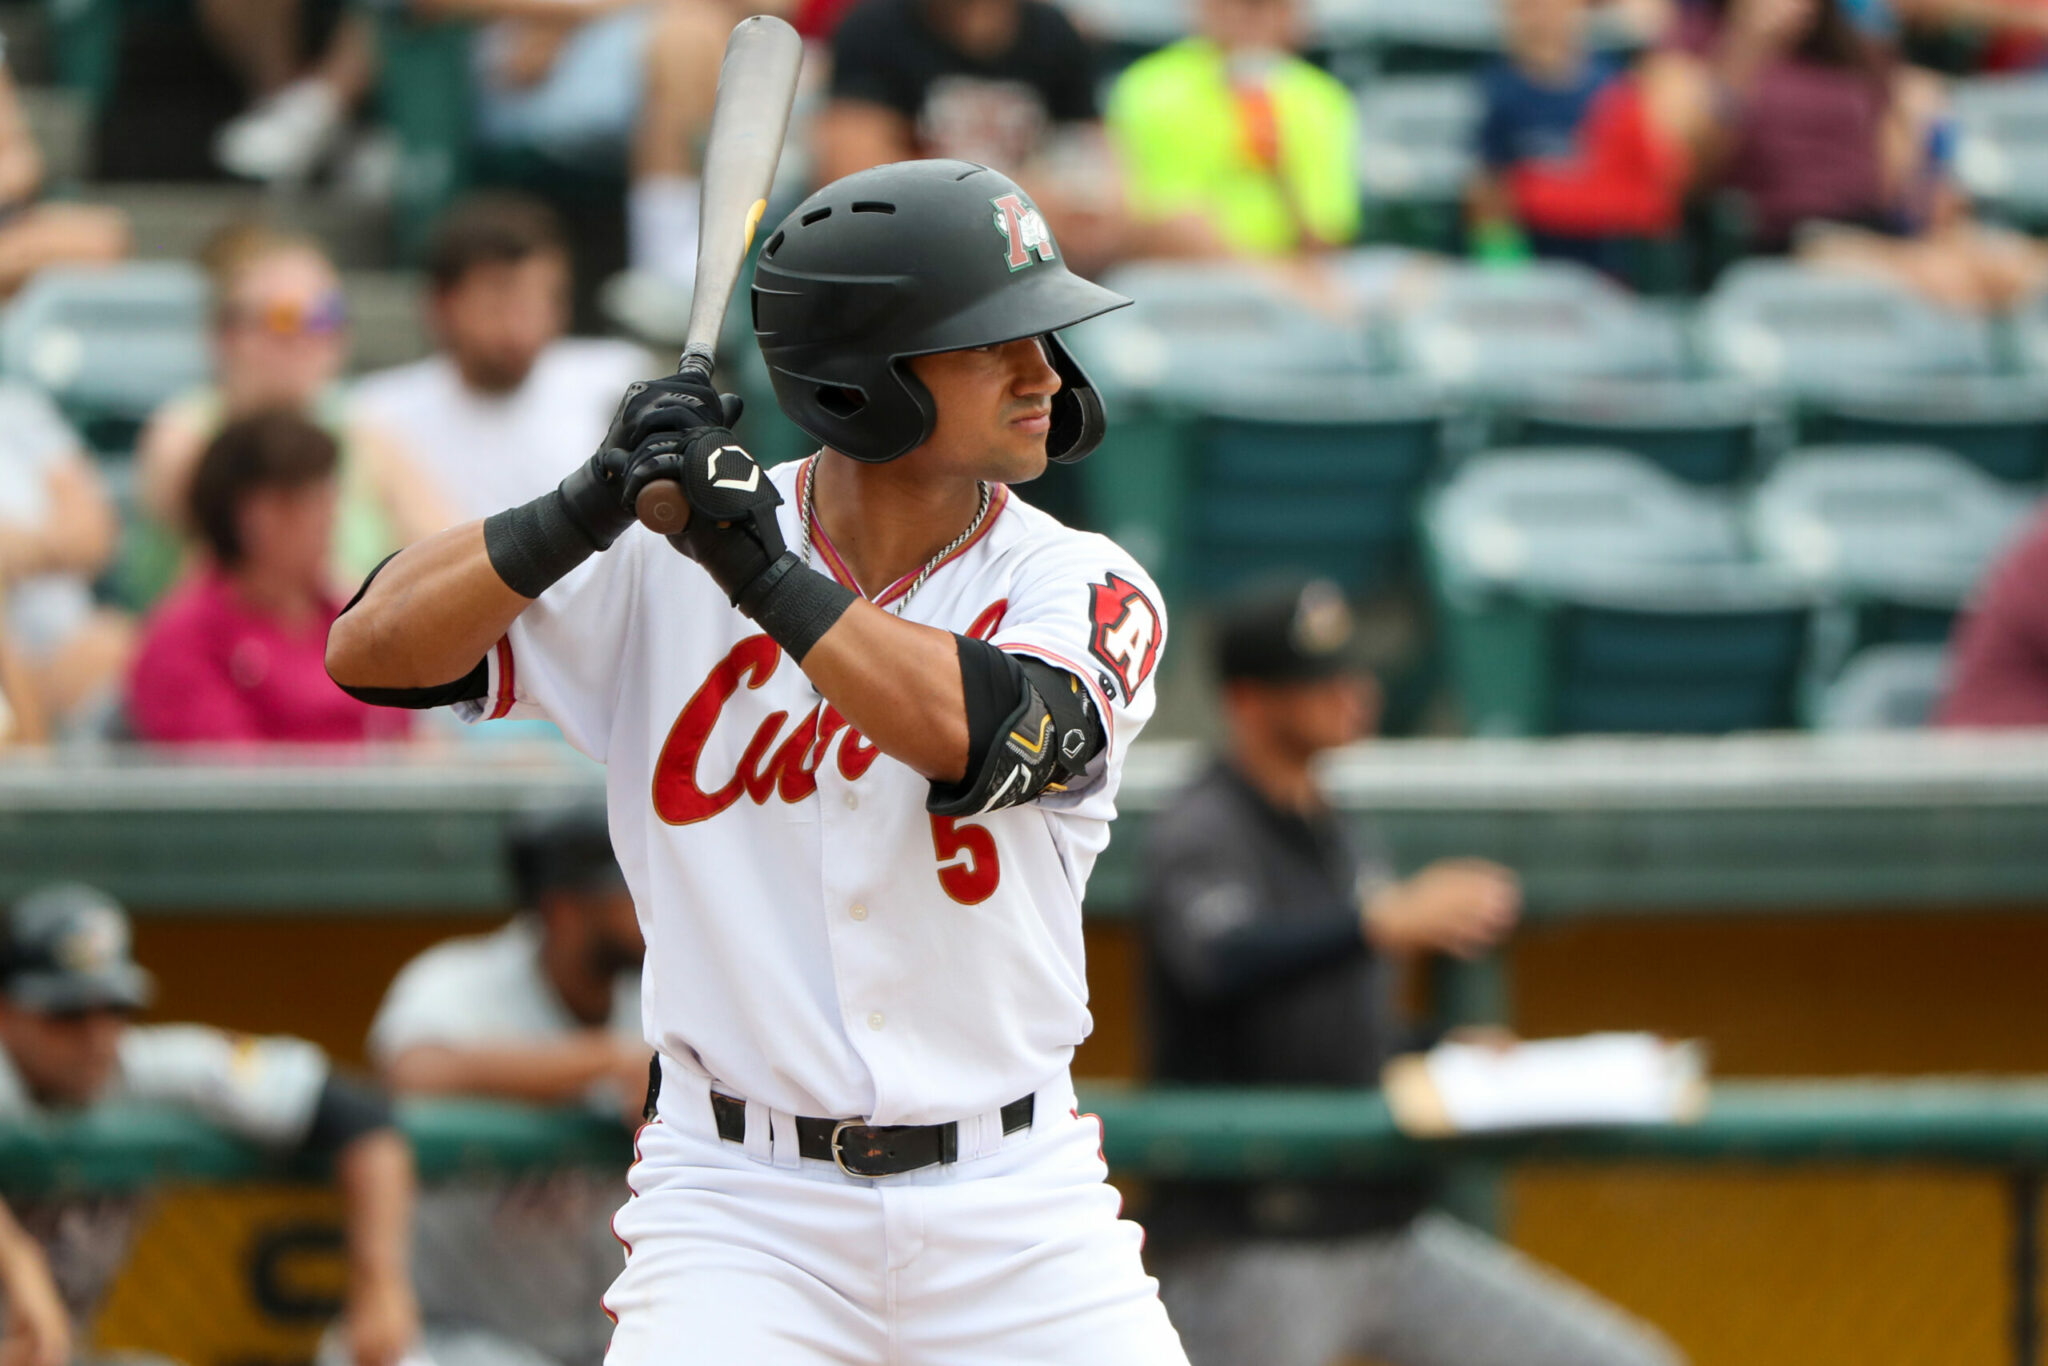 AFL Recap: Nick Gonzales Stars Again in Fourth Victory